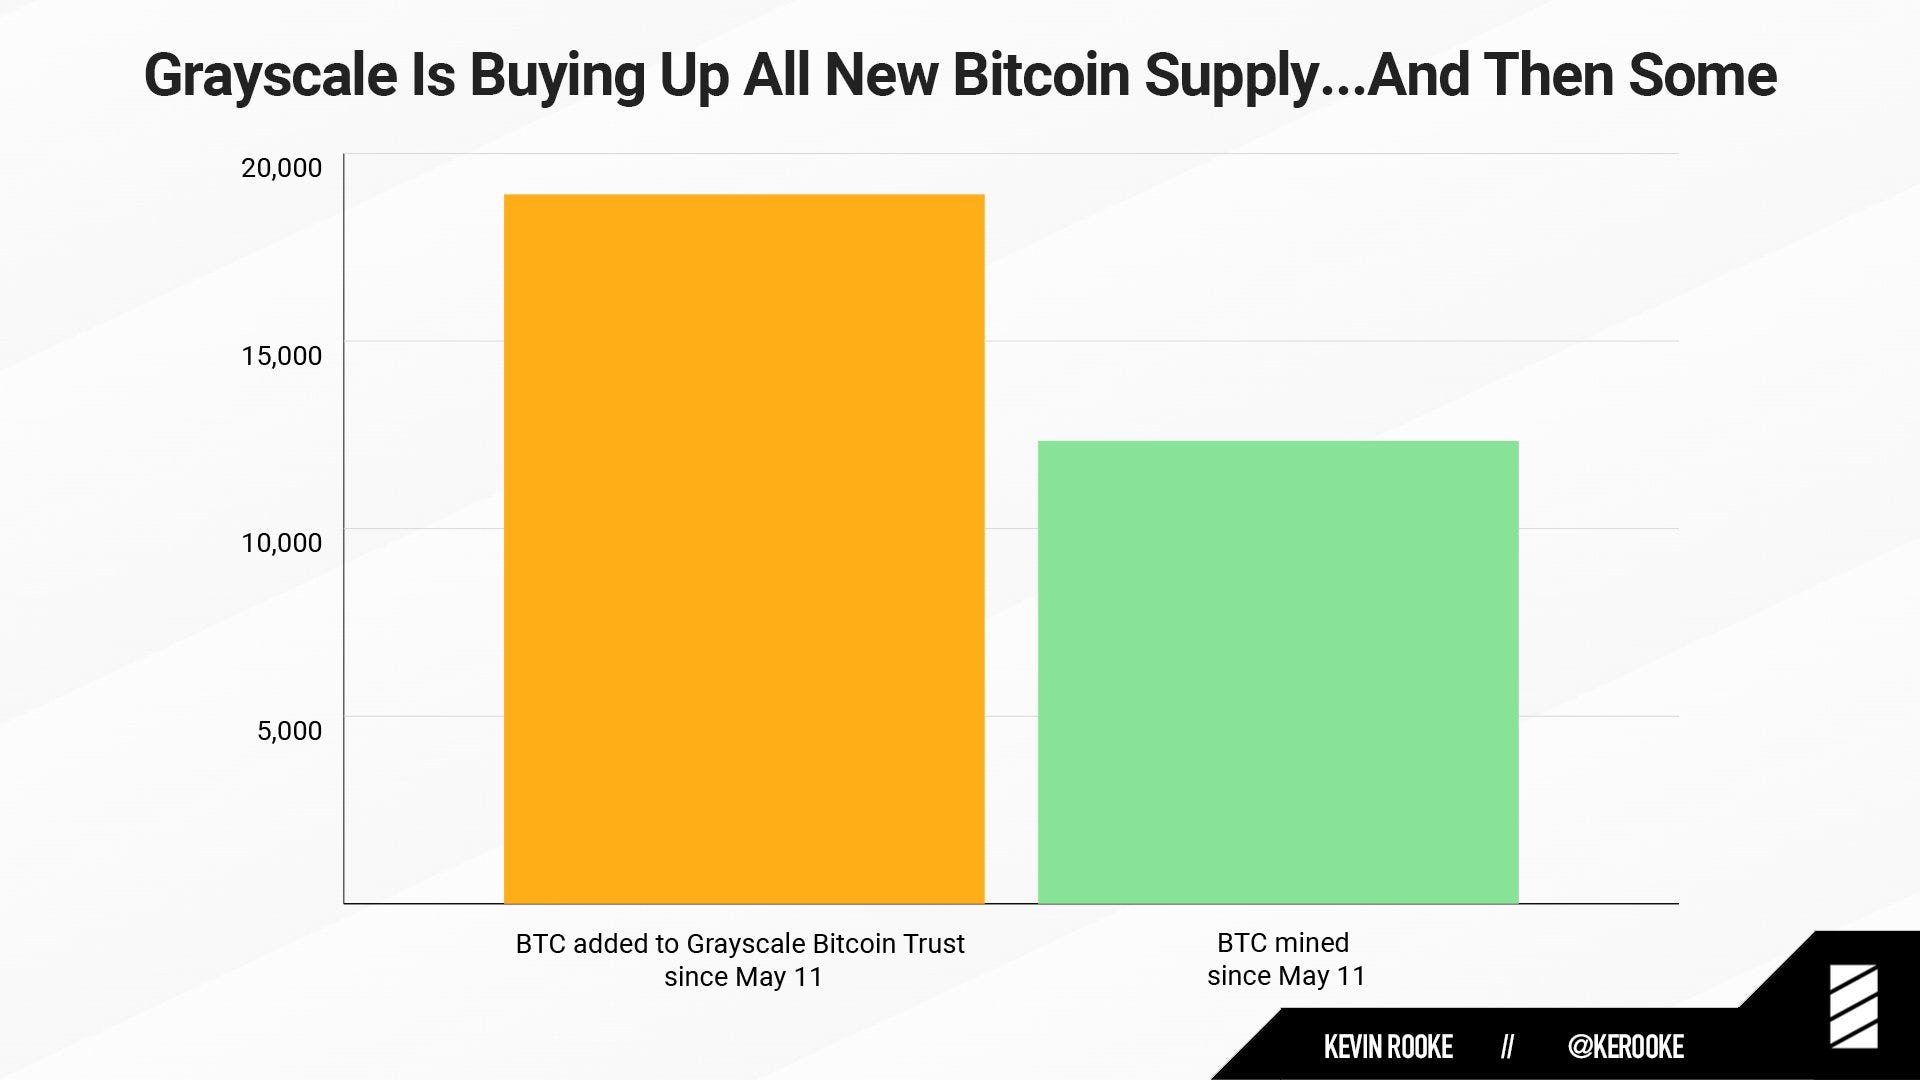 Grayscale is Buying Up All New Bitcoin Supply graph 1